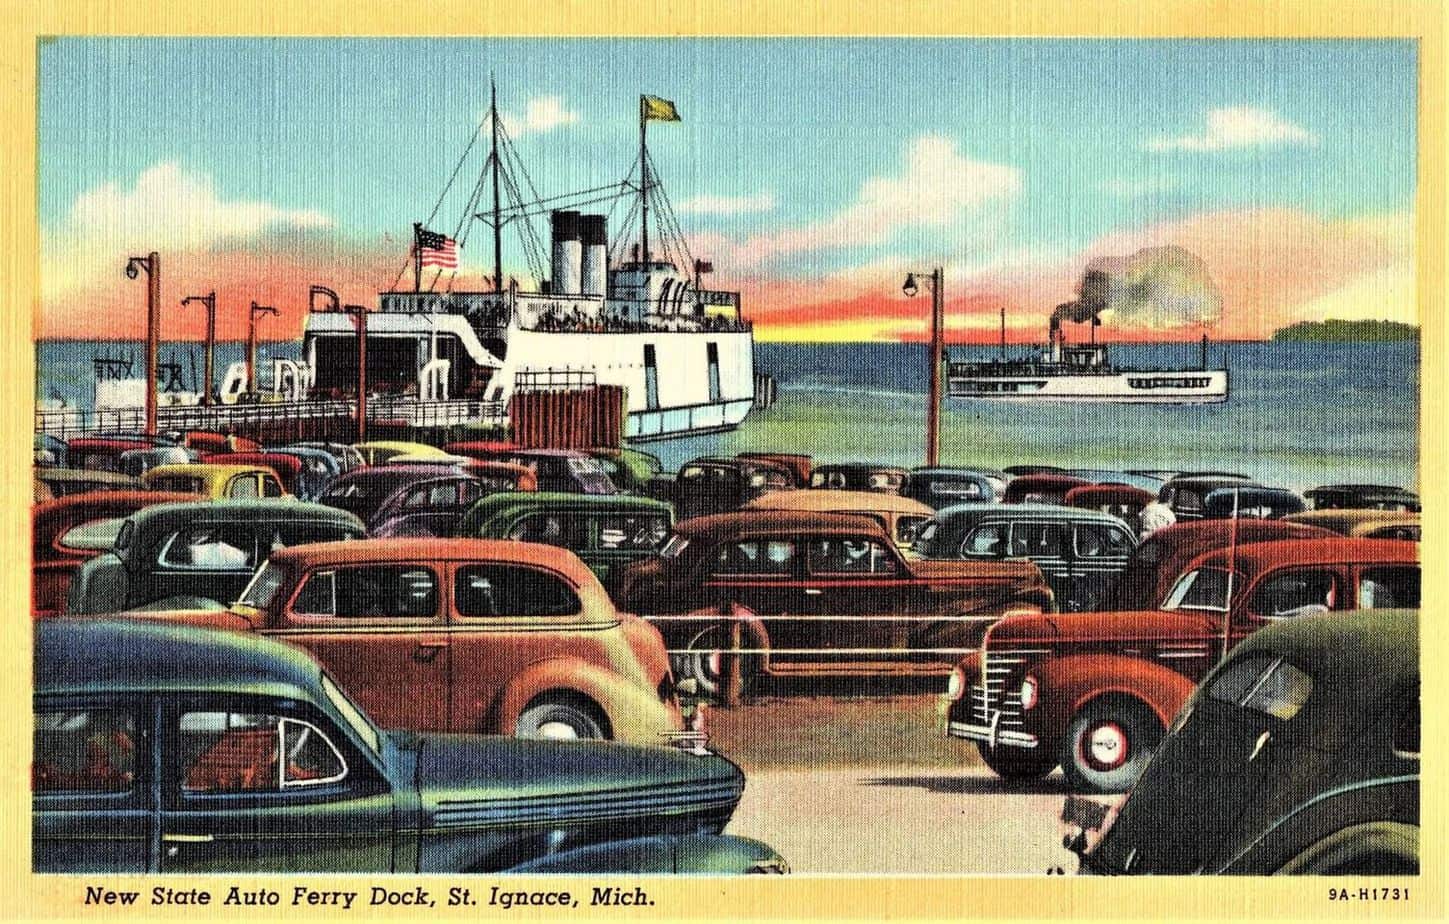 Postcard showing New State Auto Ferry Dock, St. Ignace, Michigan in 1939